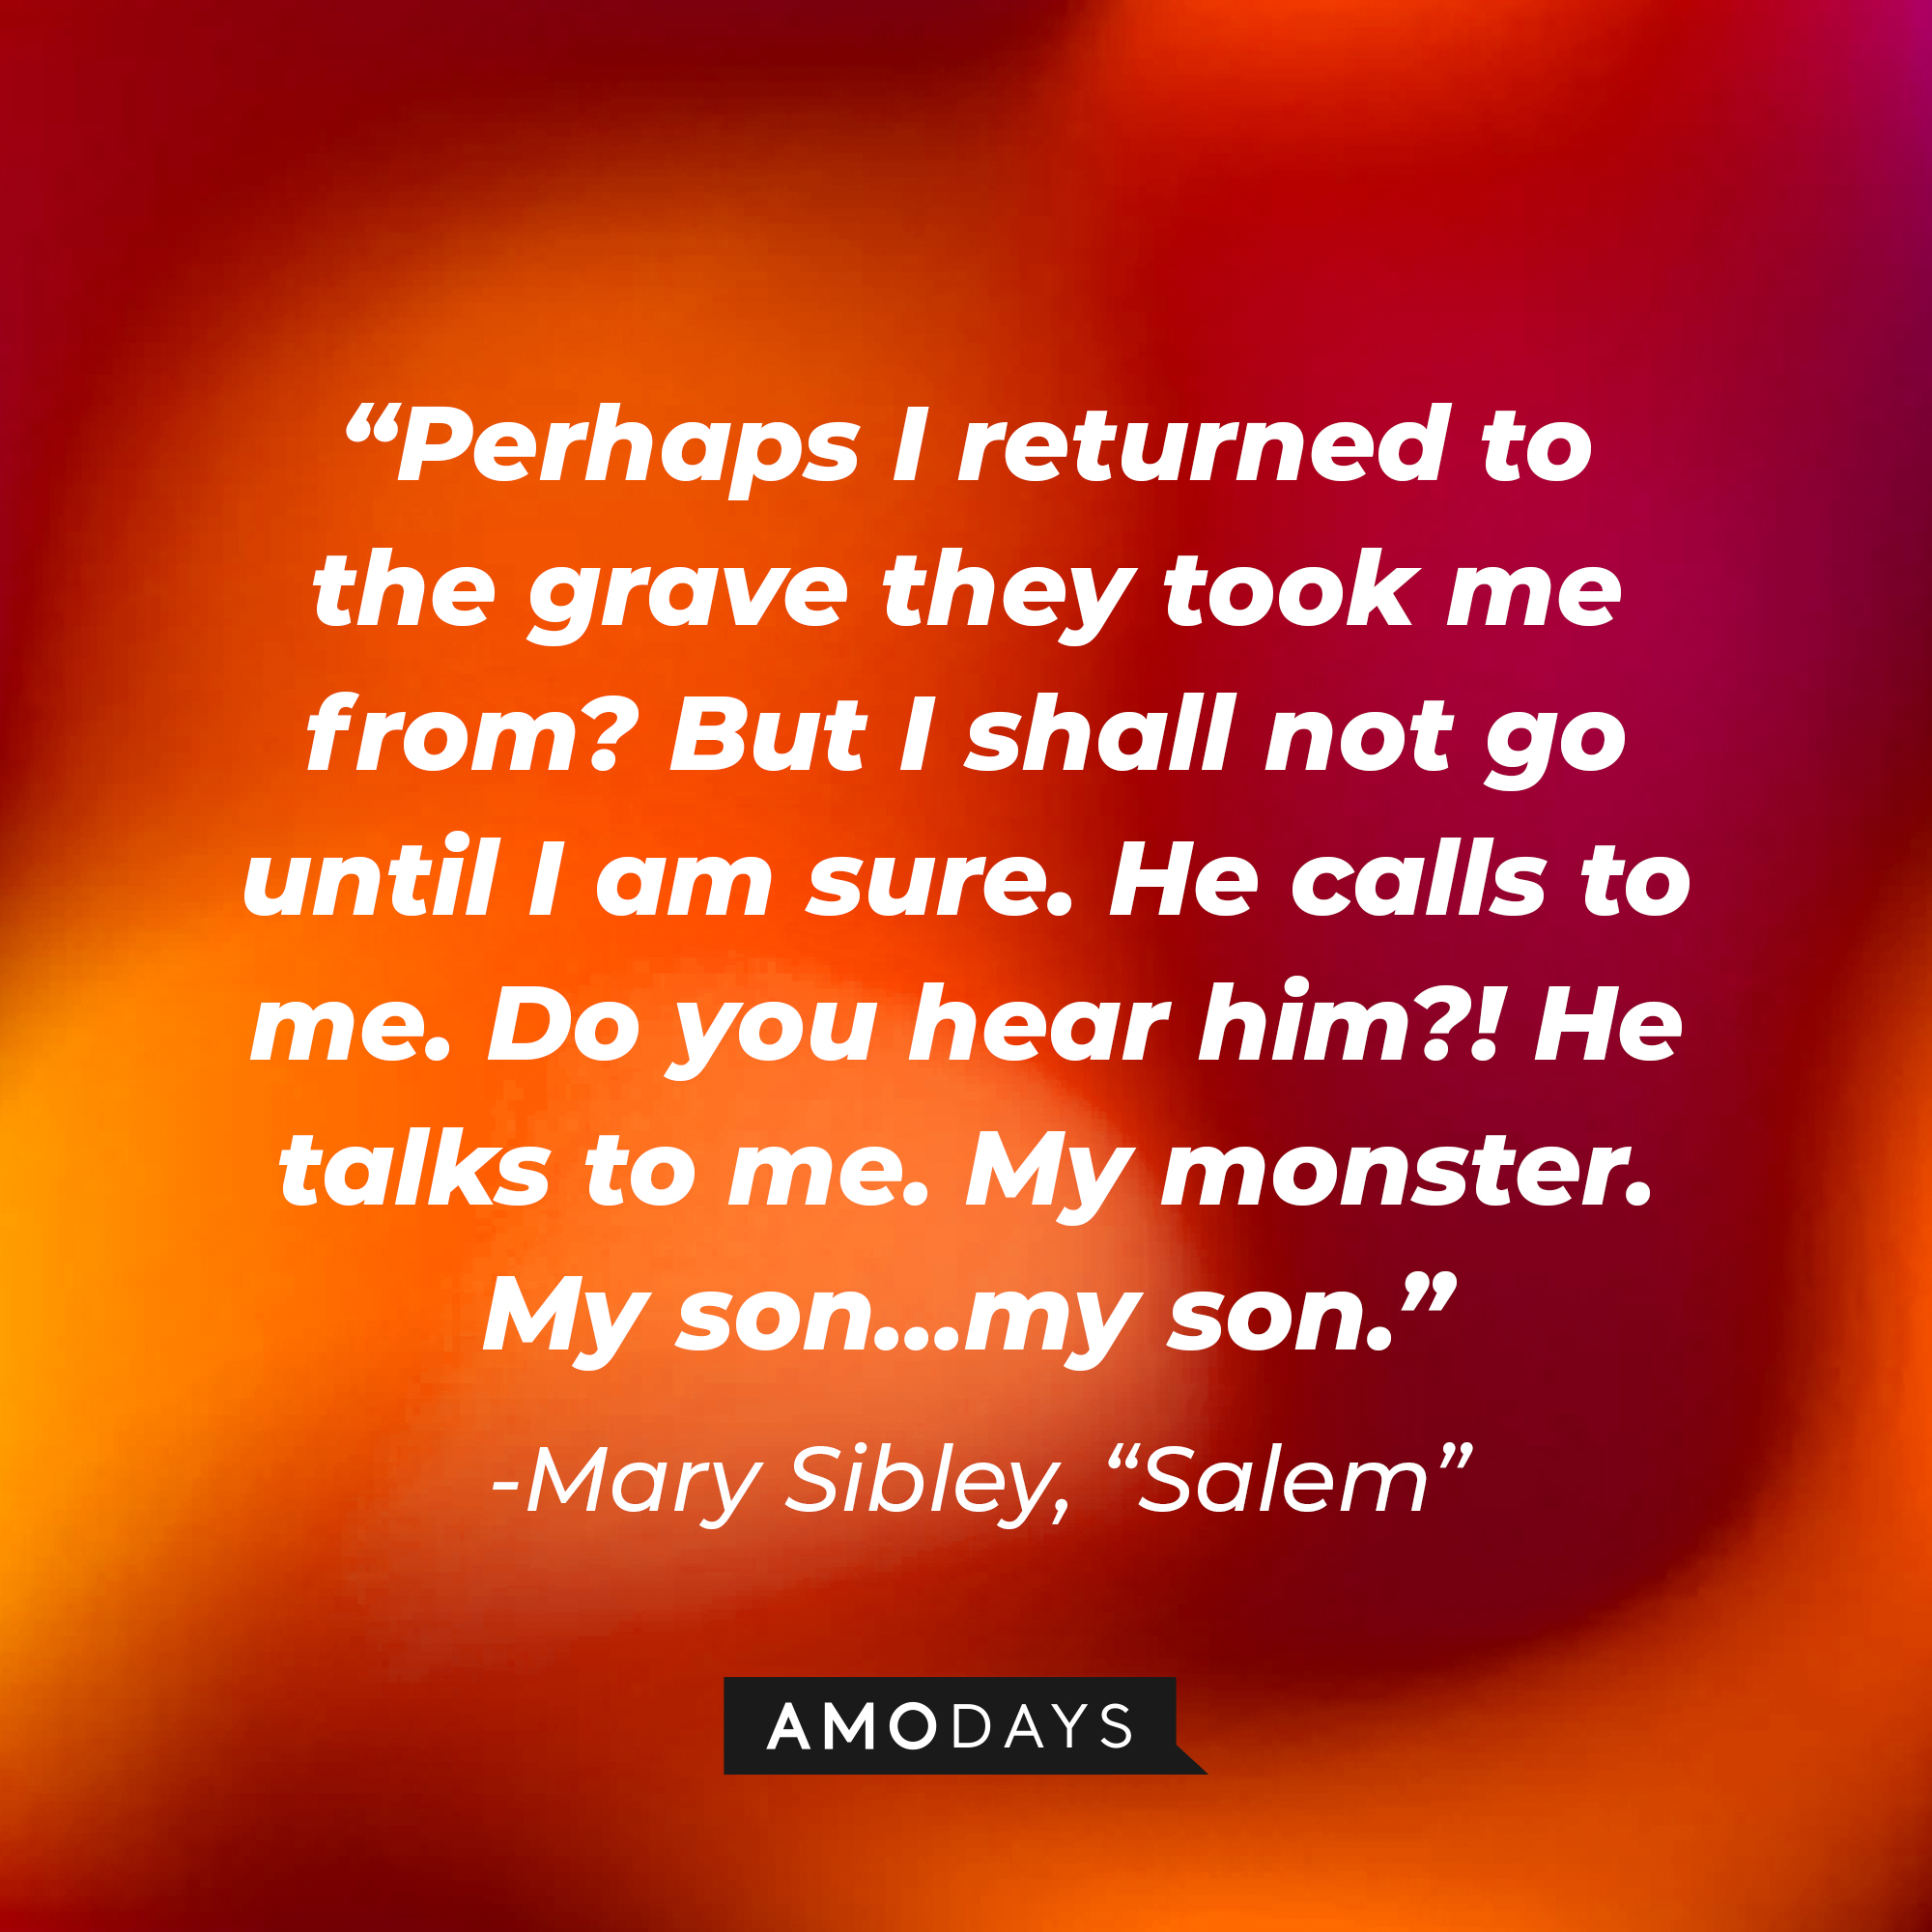 Mary Sibley's quote: "Perhaps I returned to the grave they took me from? But I shall not go until I am sure. He calls to me. Do you hear him?! He talks to me. My monster. My son...my son." | Source: Amodays